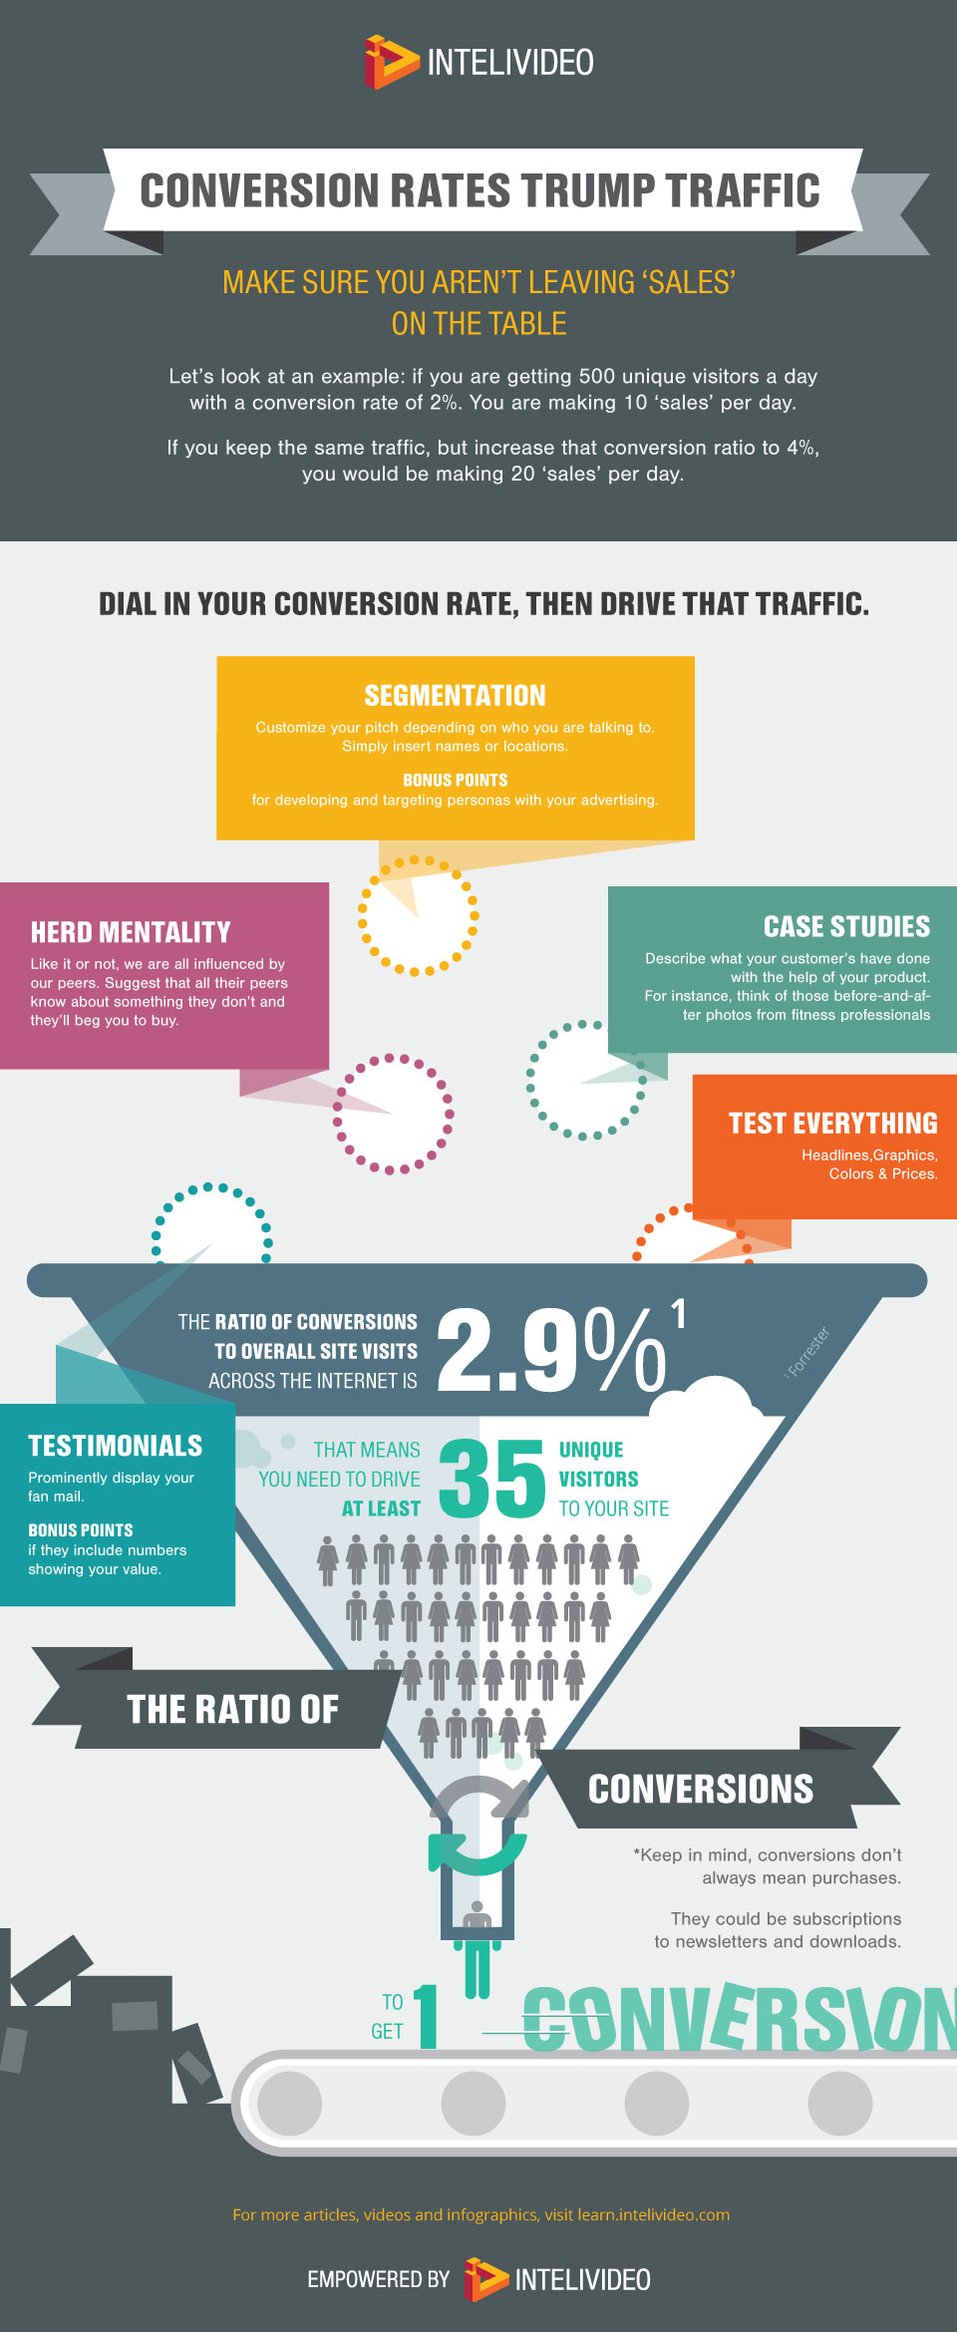 intelivideo-how-to-grow-sales-infographic.jpg